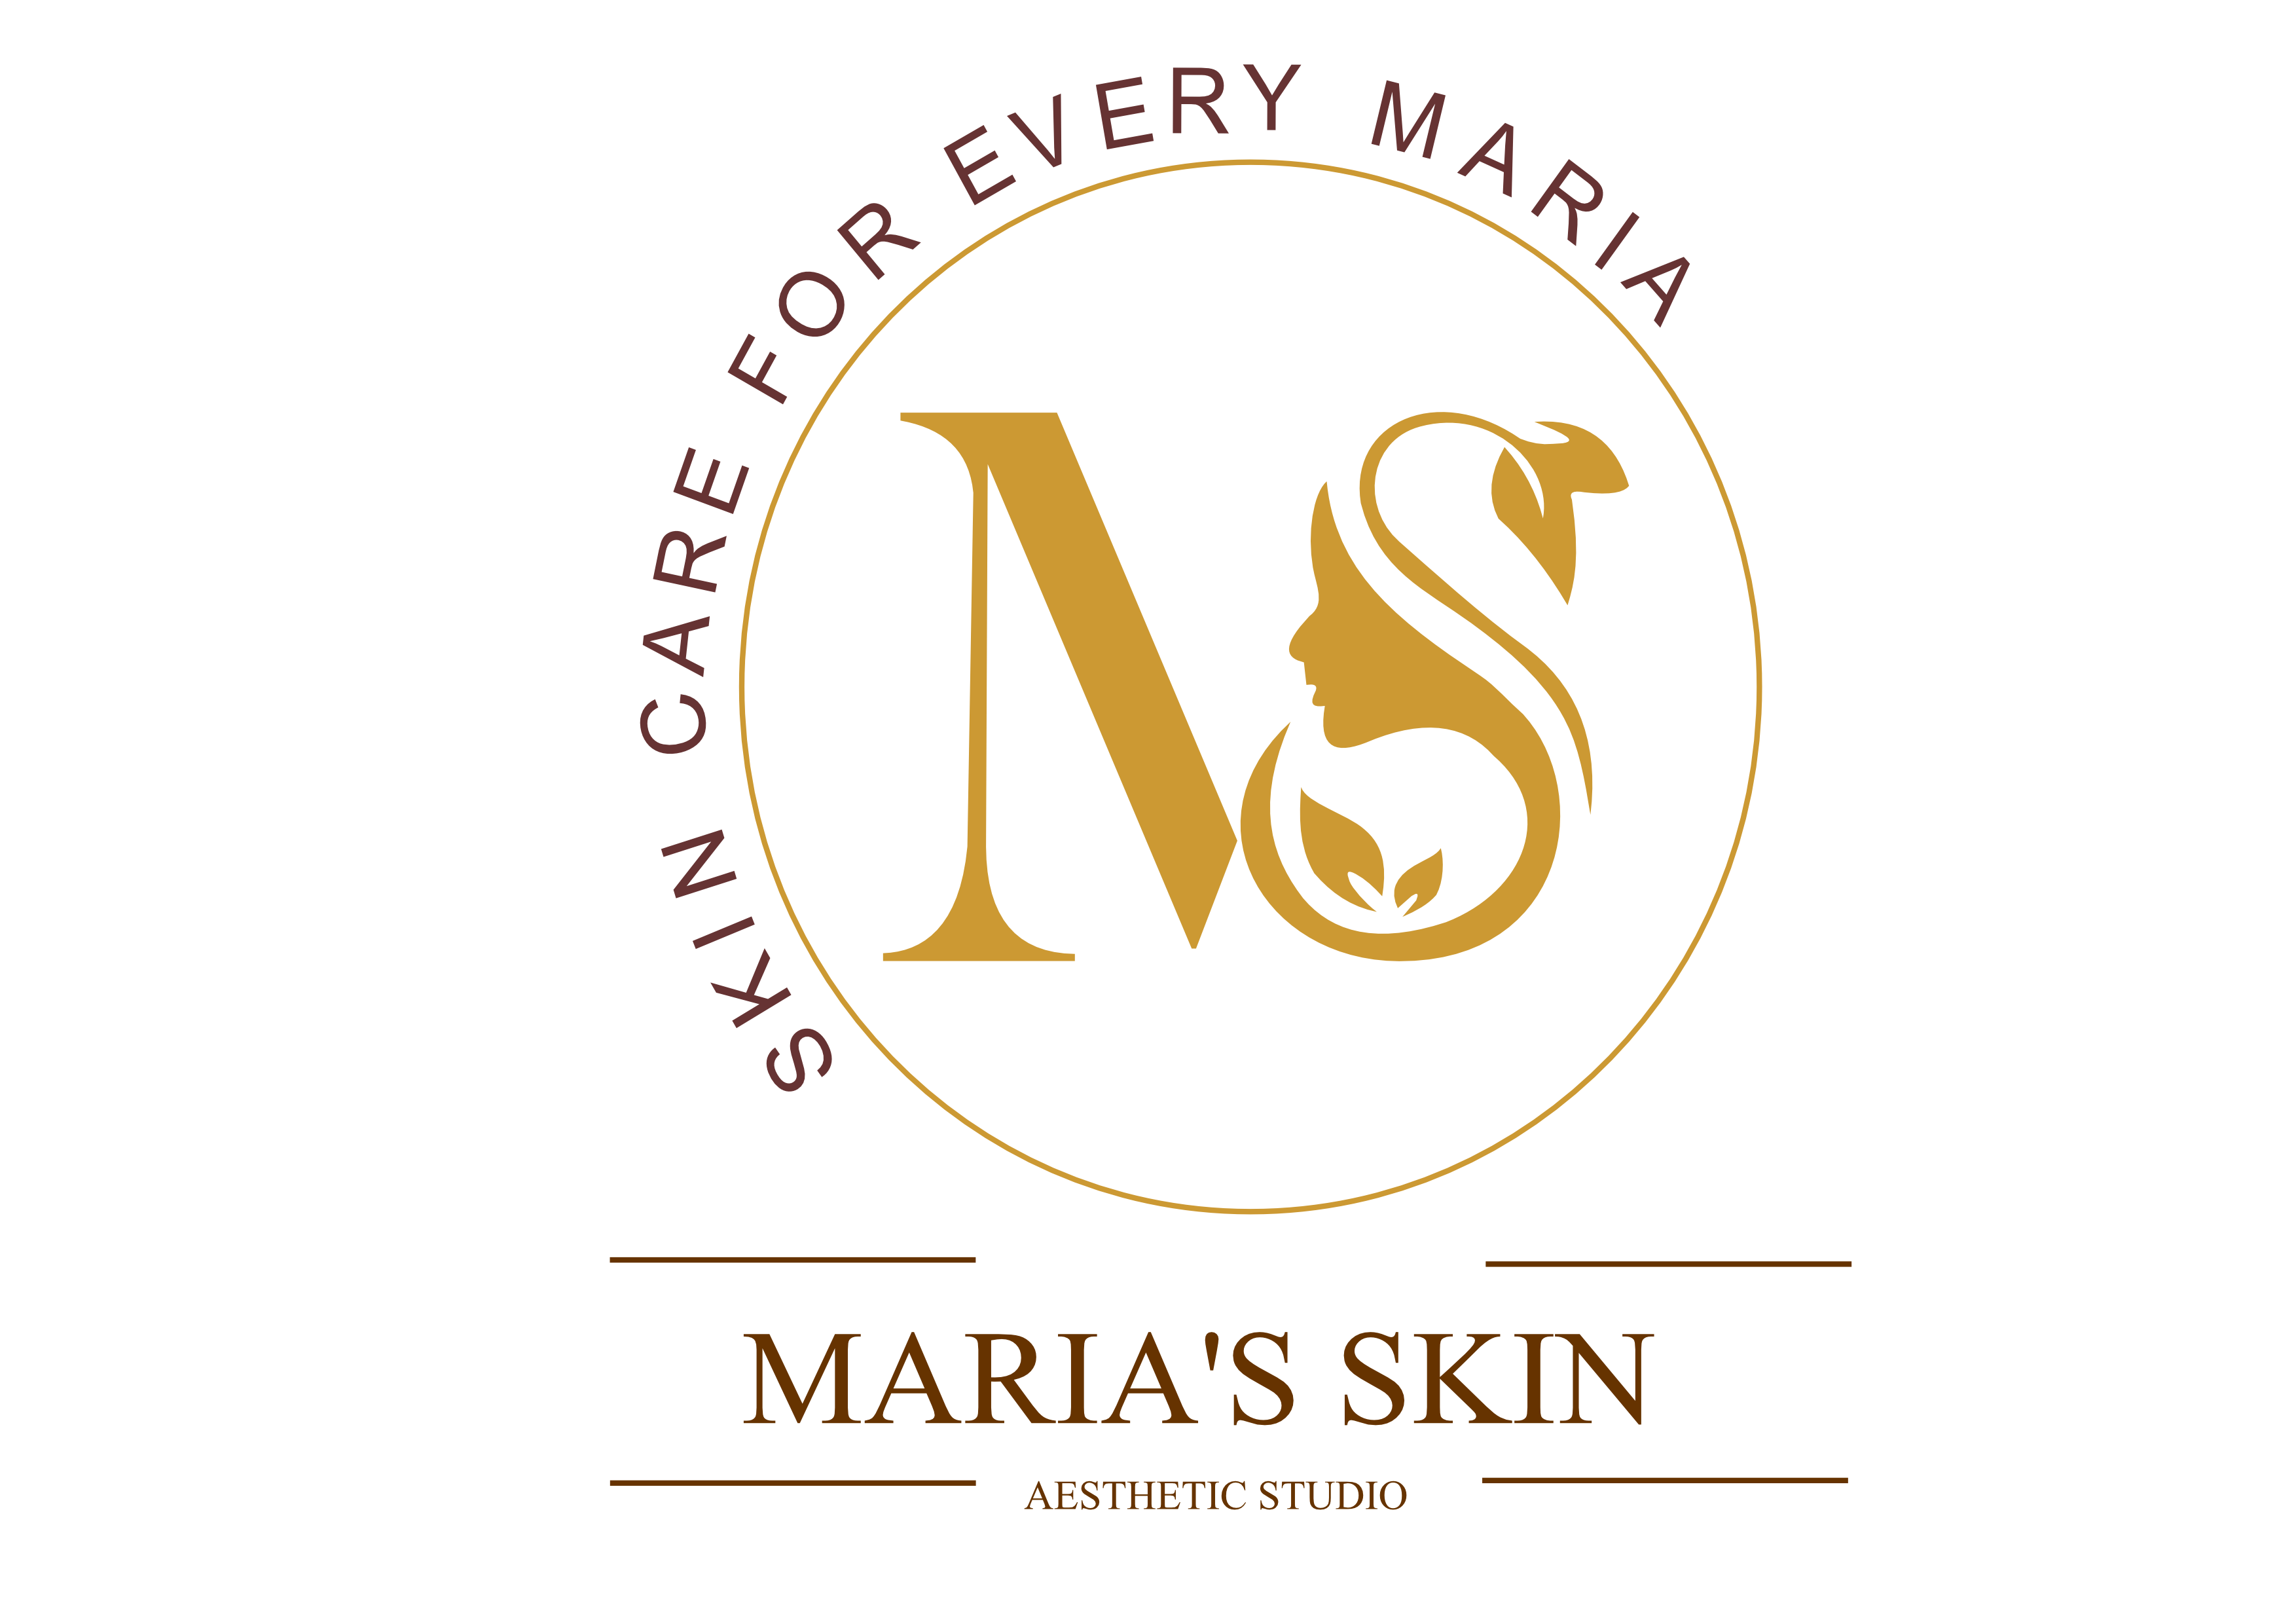 Skin Care for Every Maria